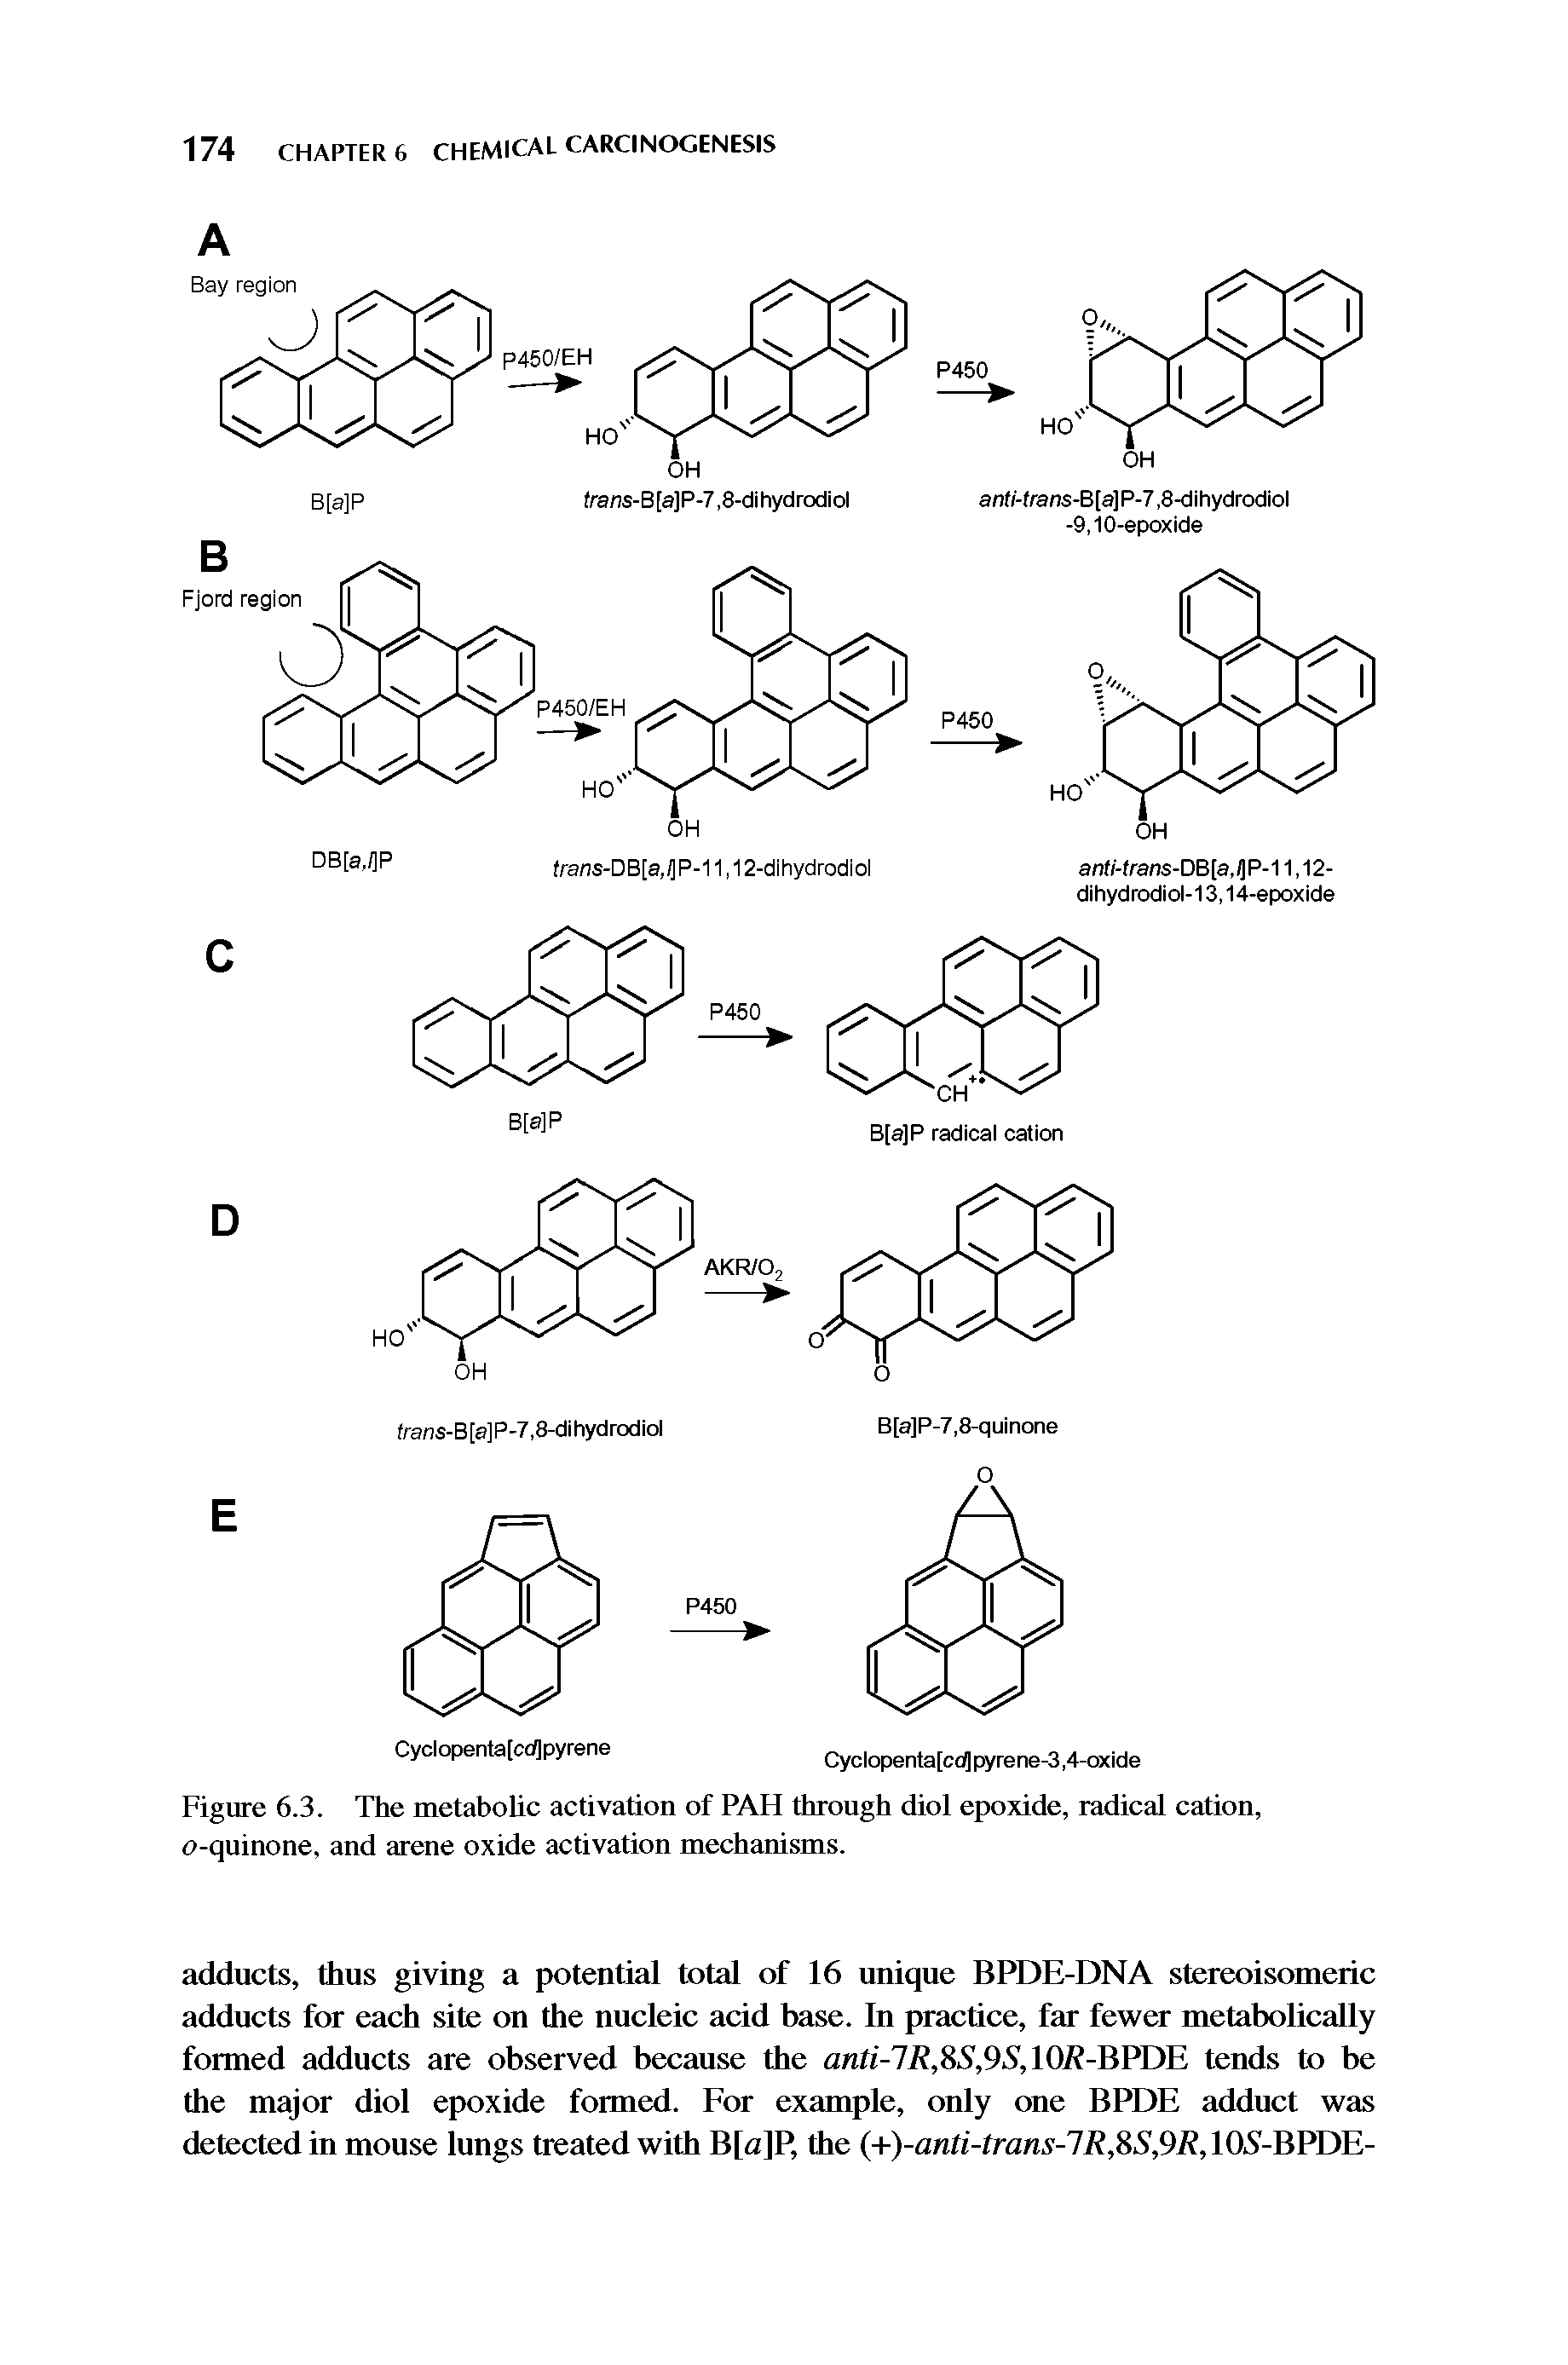 Figure 6.3. The metabolic activation of PAH through diol epoxide, radical cation, o-quinone, and arene oxide activation mechanisms.